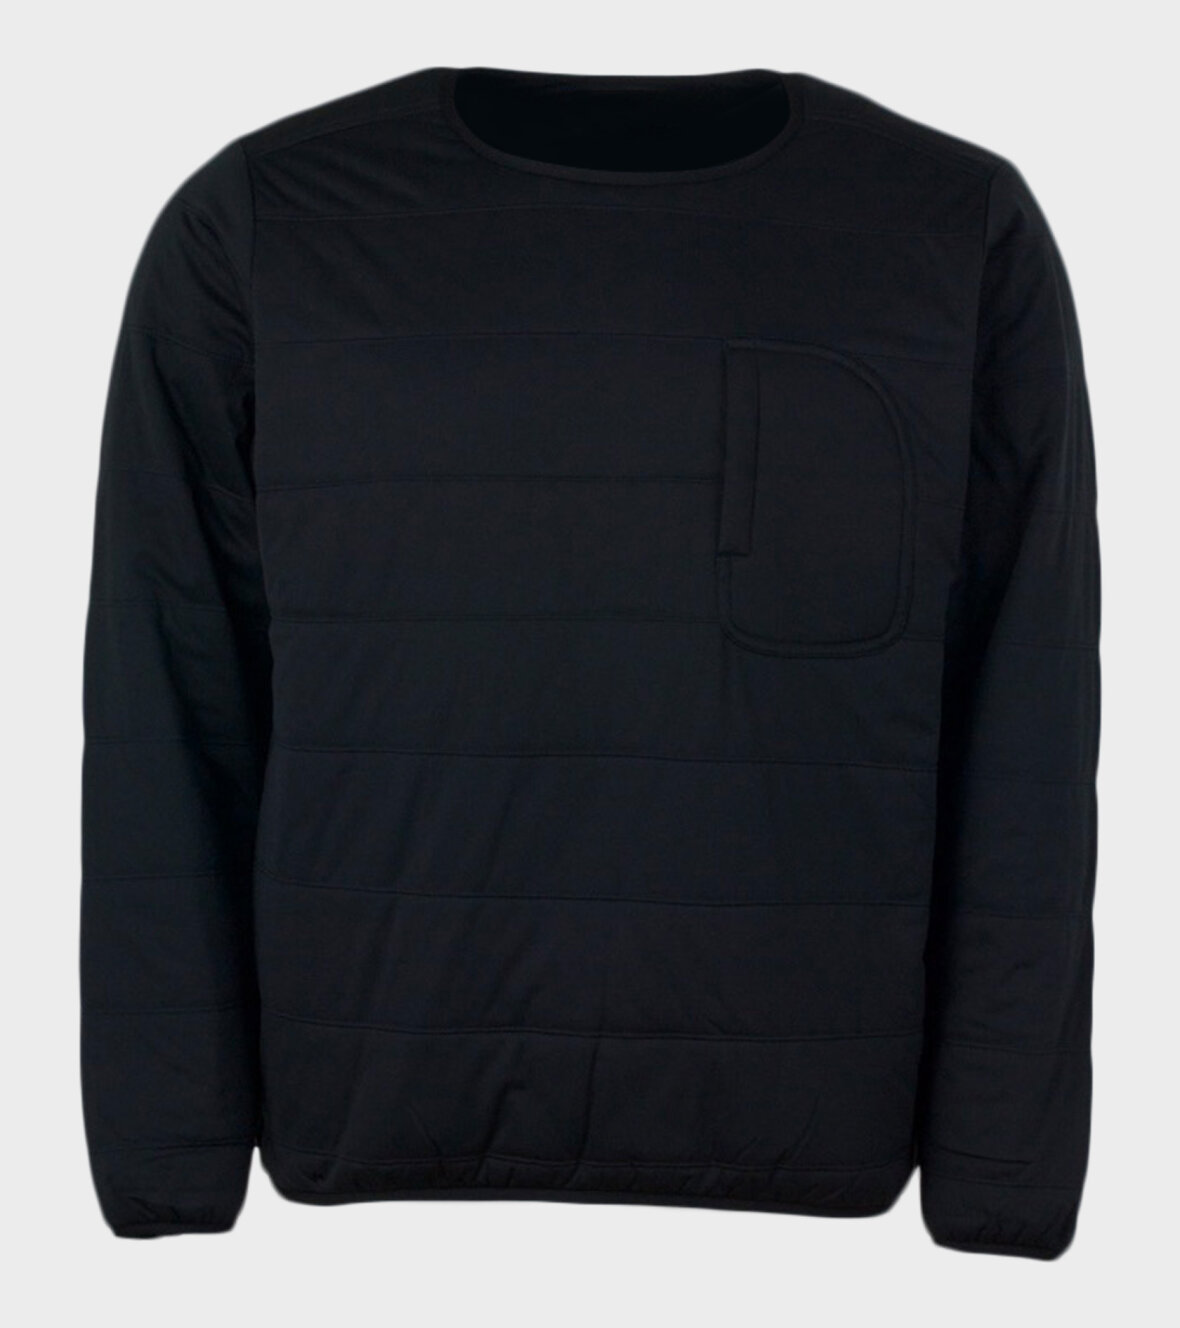 dr. Adams - Clothing - Snow Peak - Flexible Insulated Pullover Black